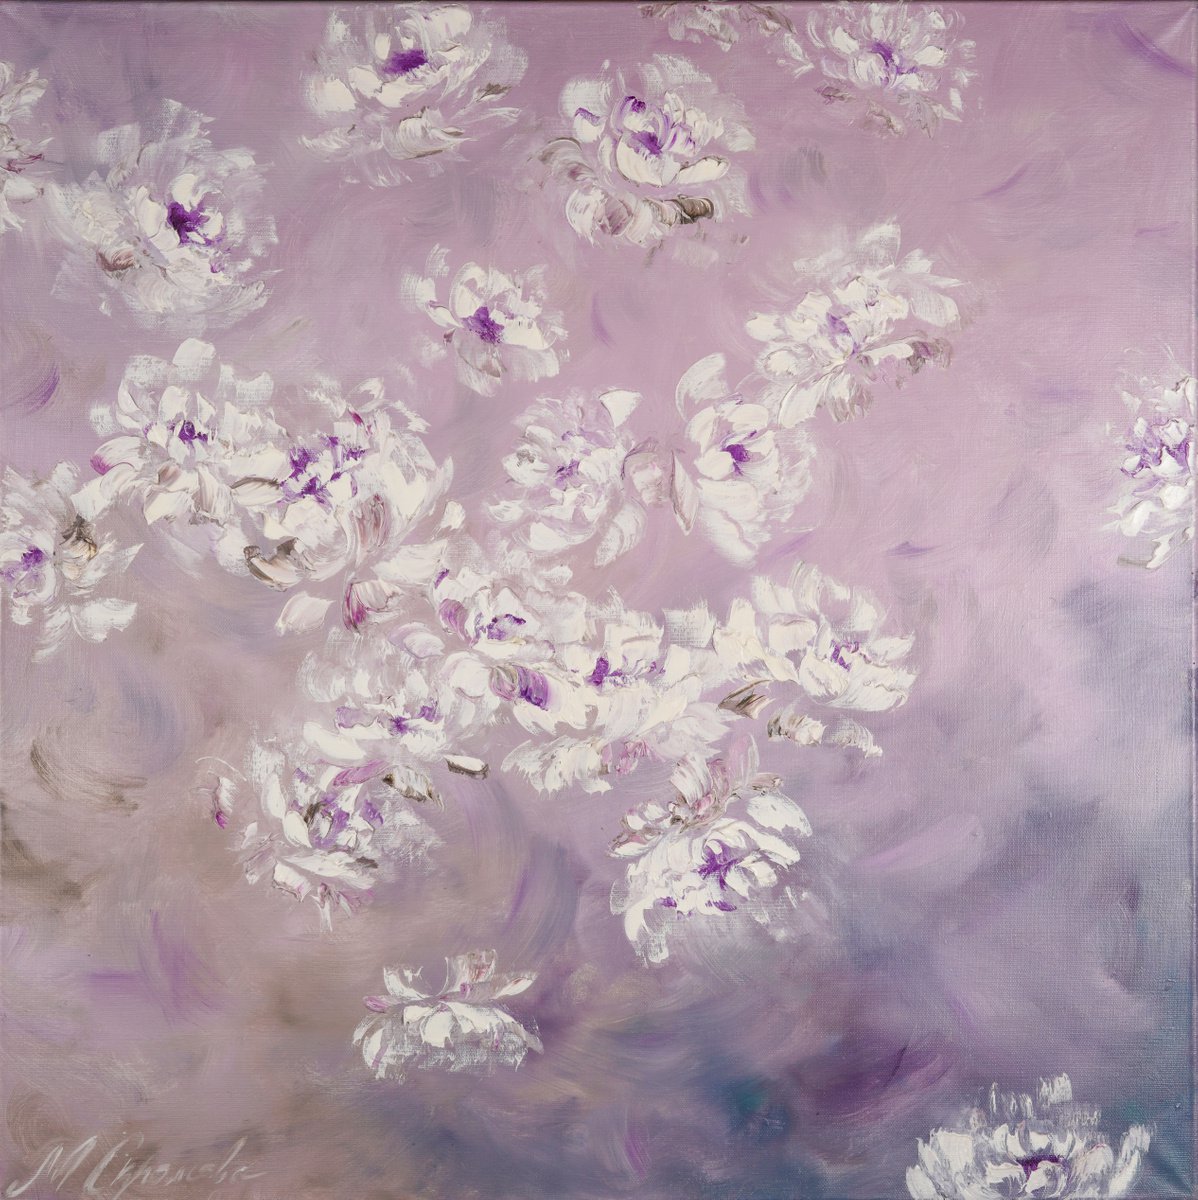 FOG IN THE GARDEN - White peonies. Abstract flowers. Shining peonies. Lilac tones. Haze. D... by Marina Skromova